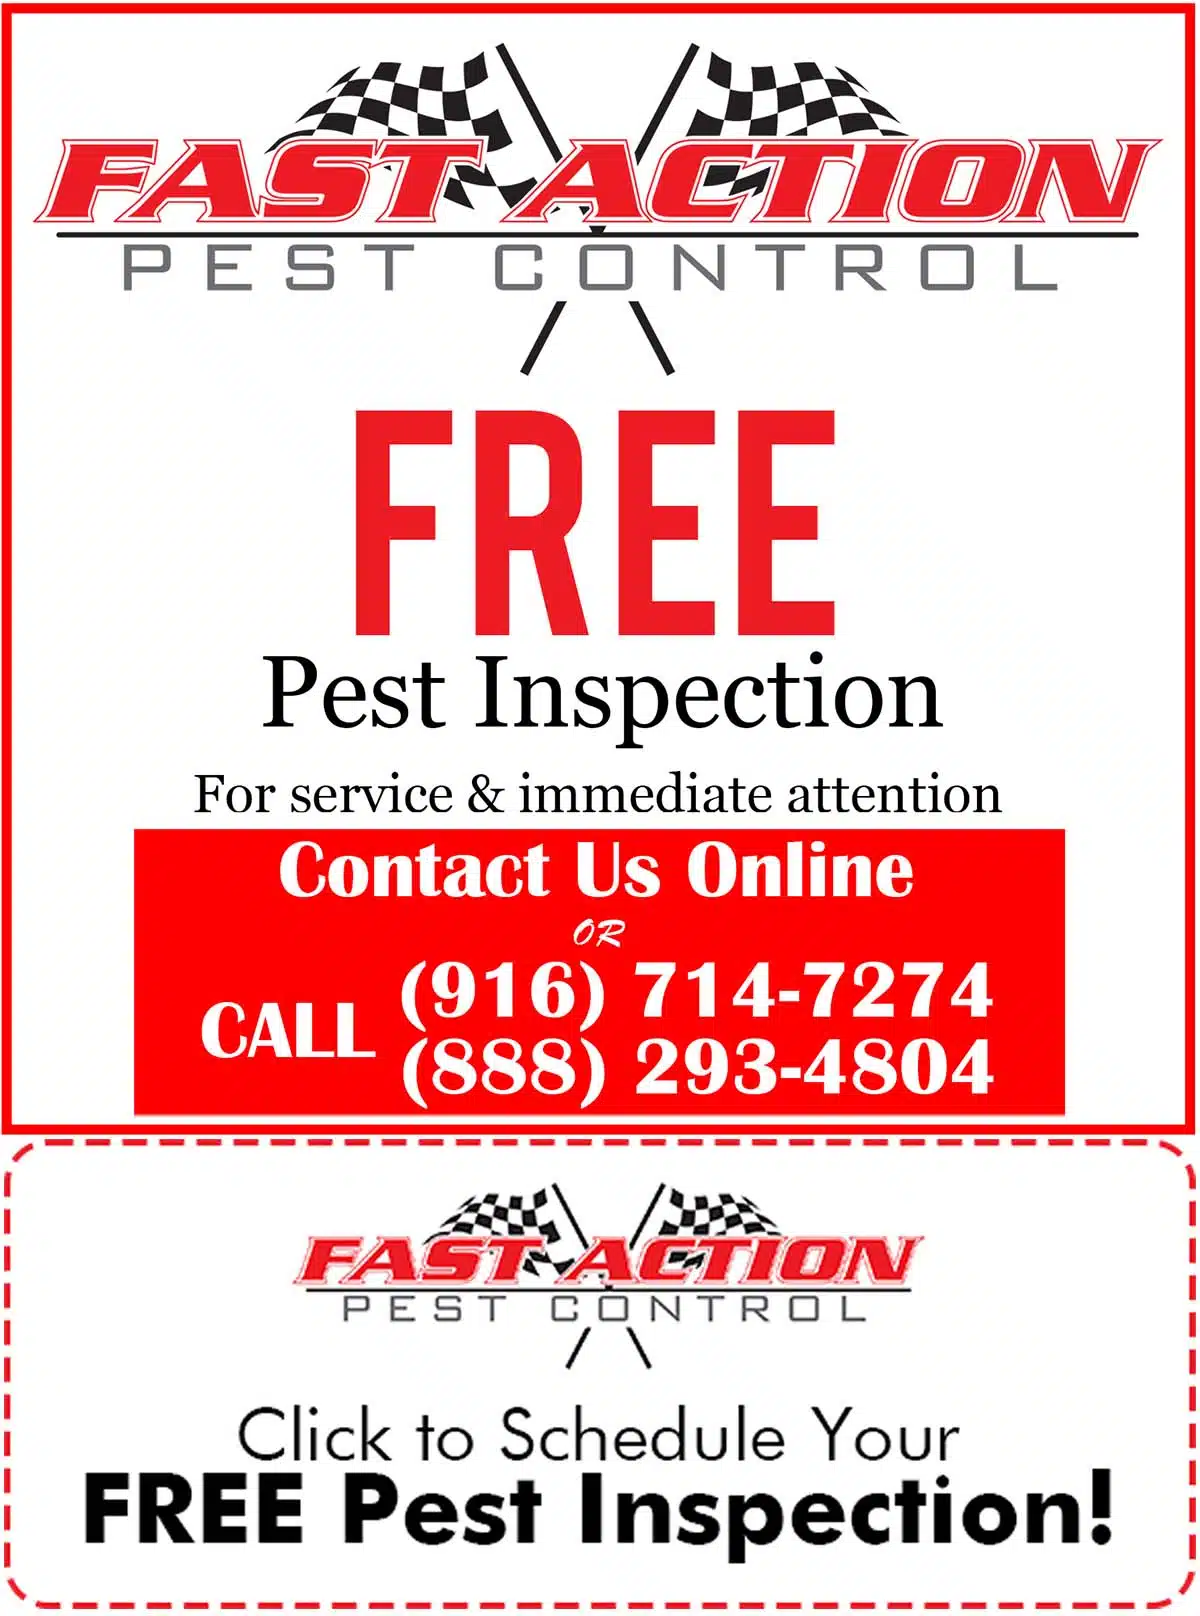 Fast Action Pest Control. Elk Grove Insect & Rodent Exterminators. Top Rated Pest Service, Best Pest Control Company in Elk Grove, CA. & surrounding